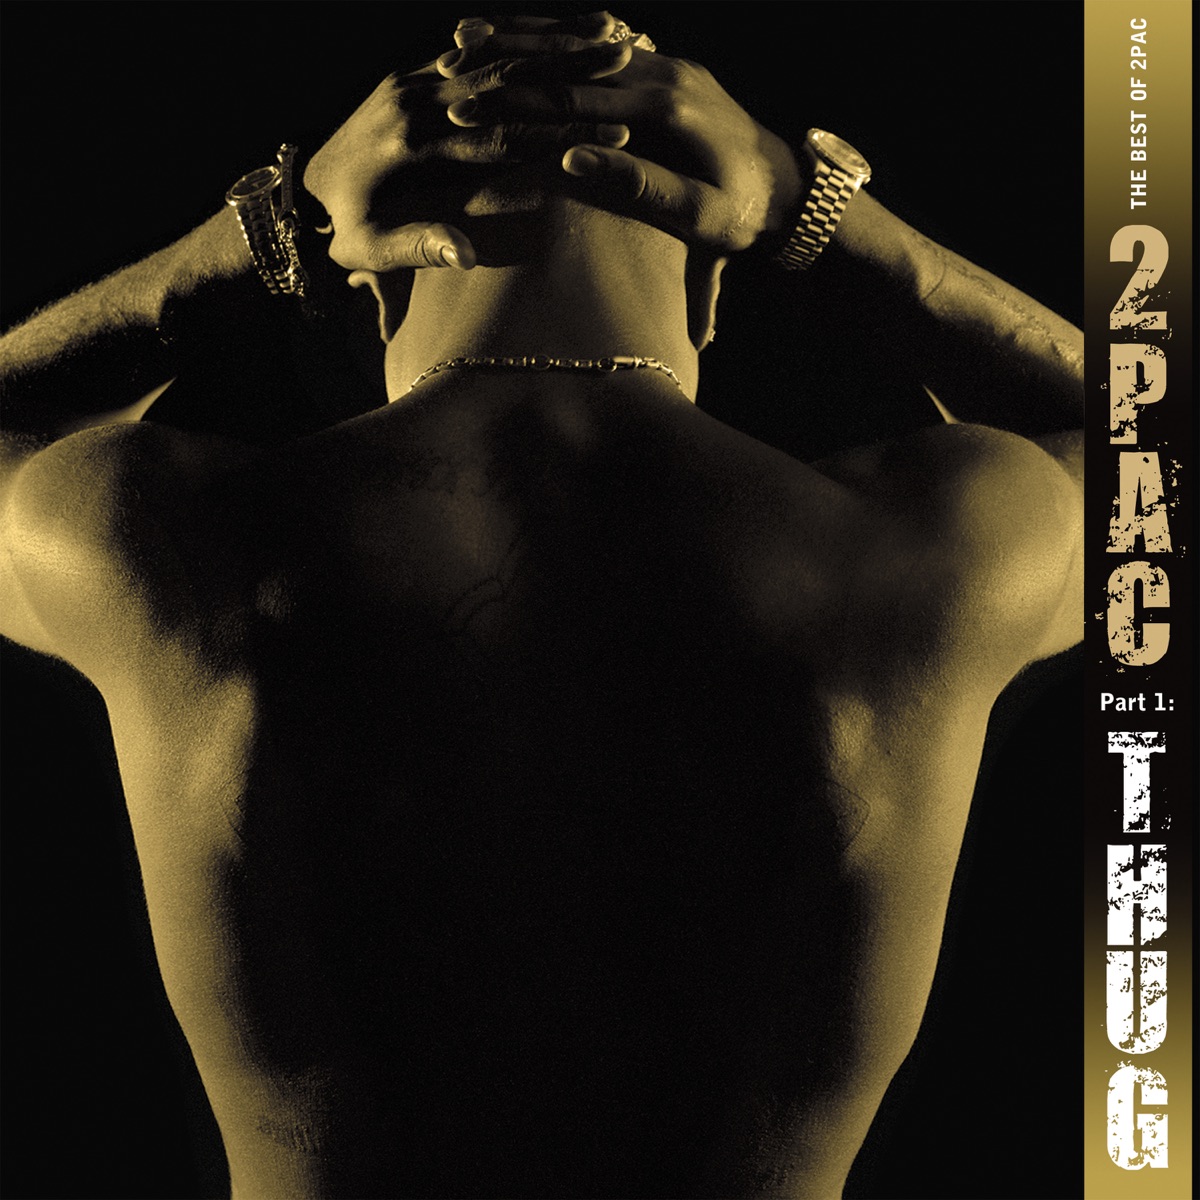 ‎The Best of 2Pac, Pt. 1: Thug - Album by 2Pac - Apple Music